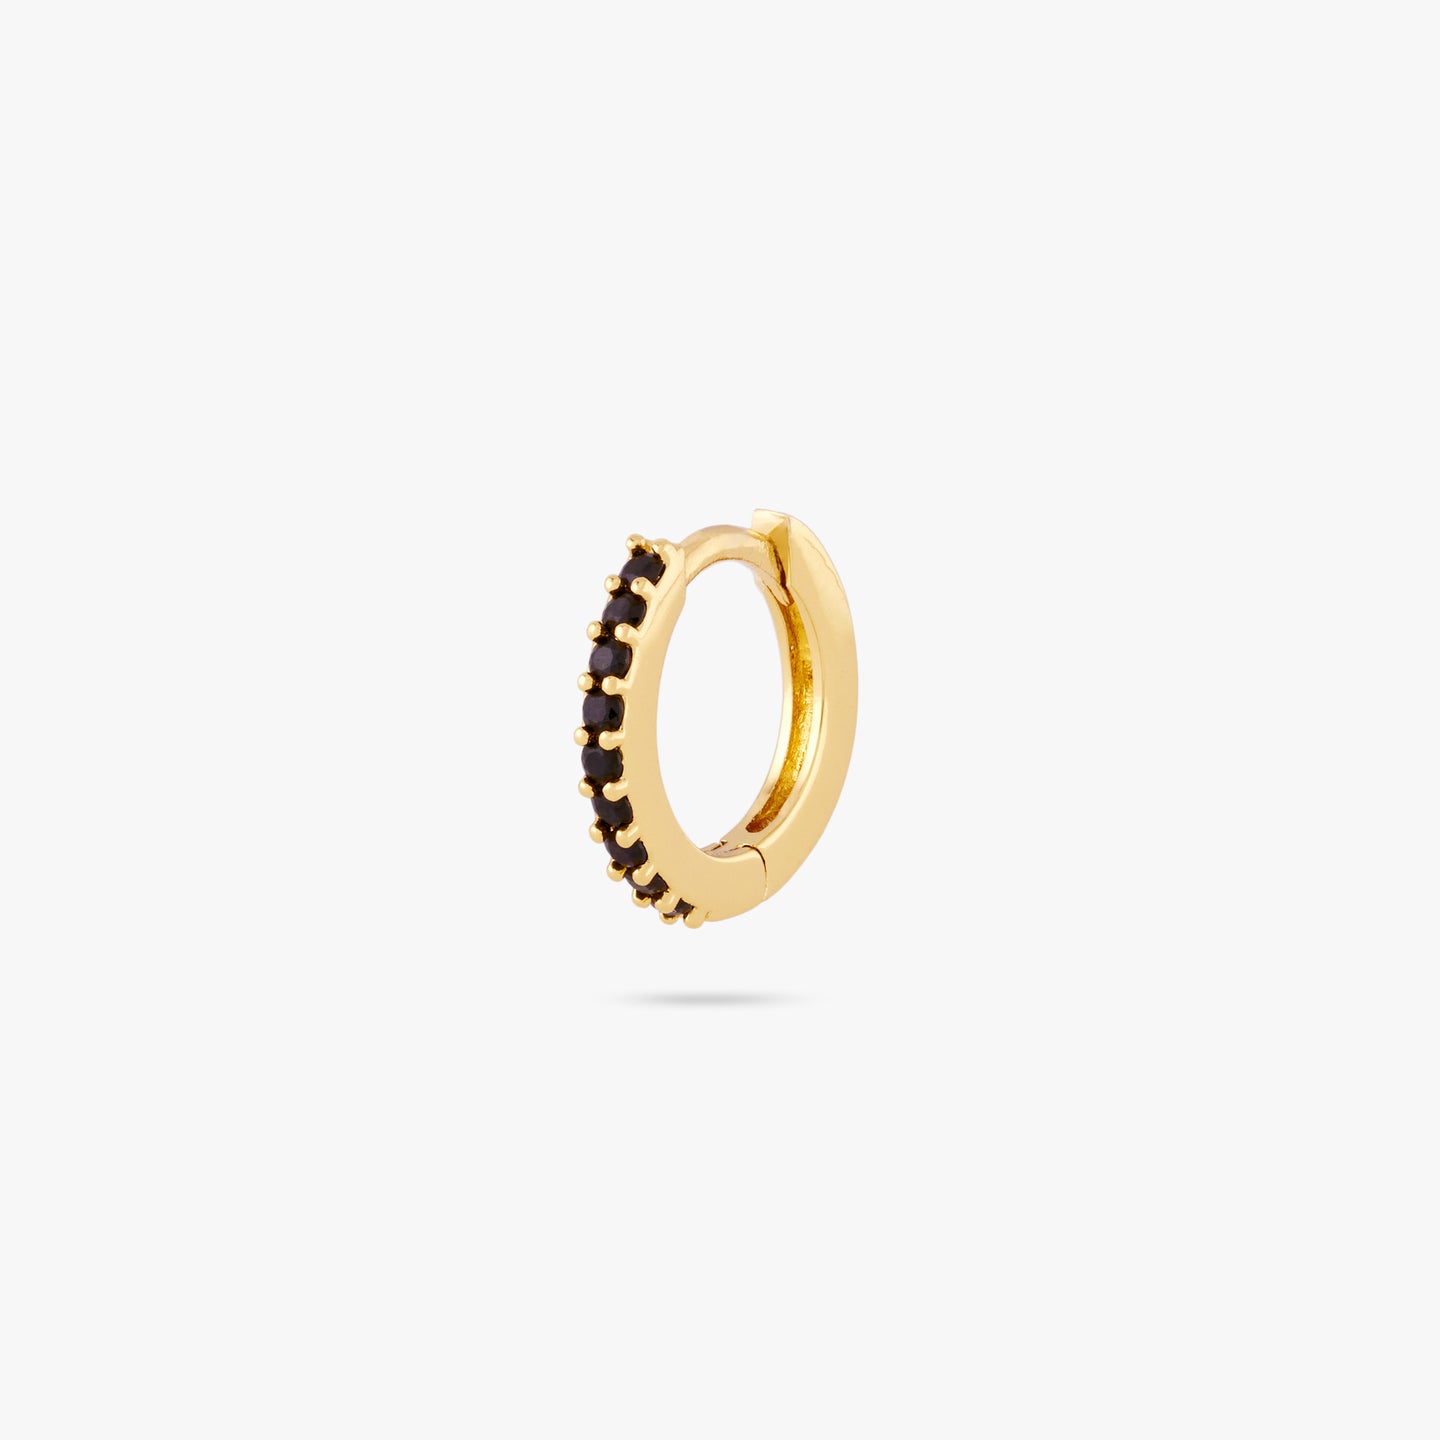 A mini gold huggie lined with black cz gems on the front color:null|gold/black